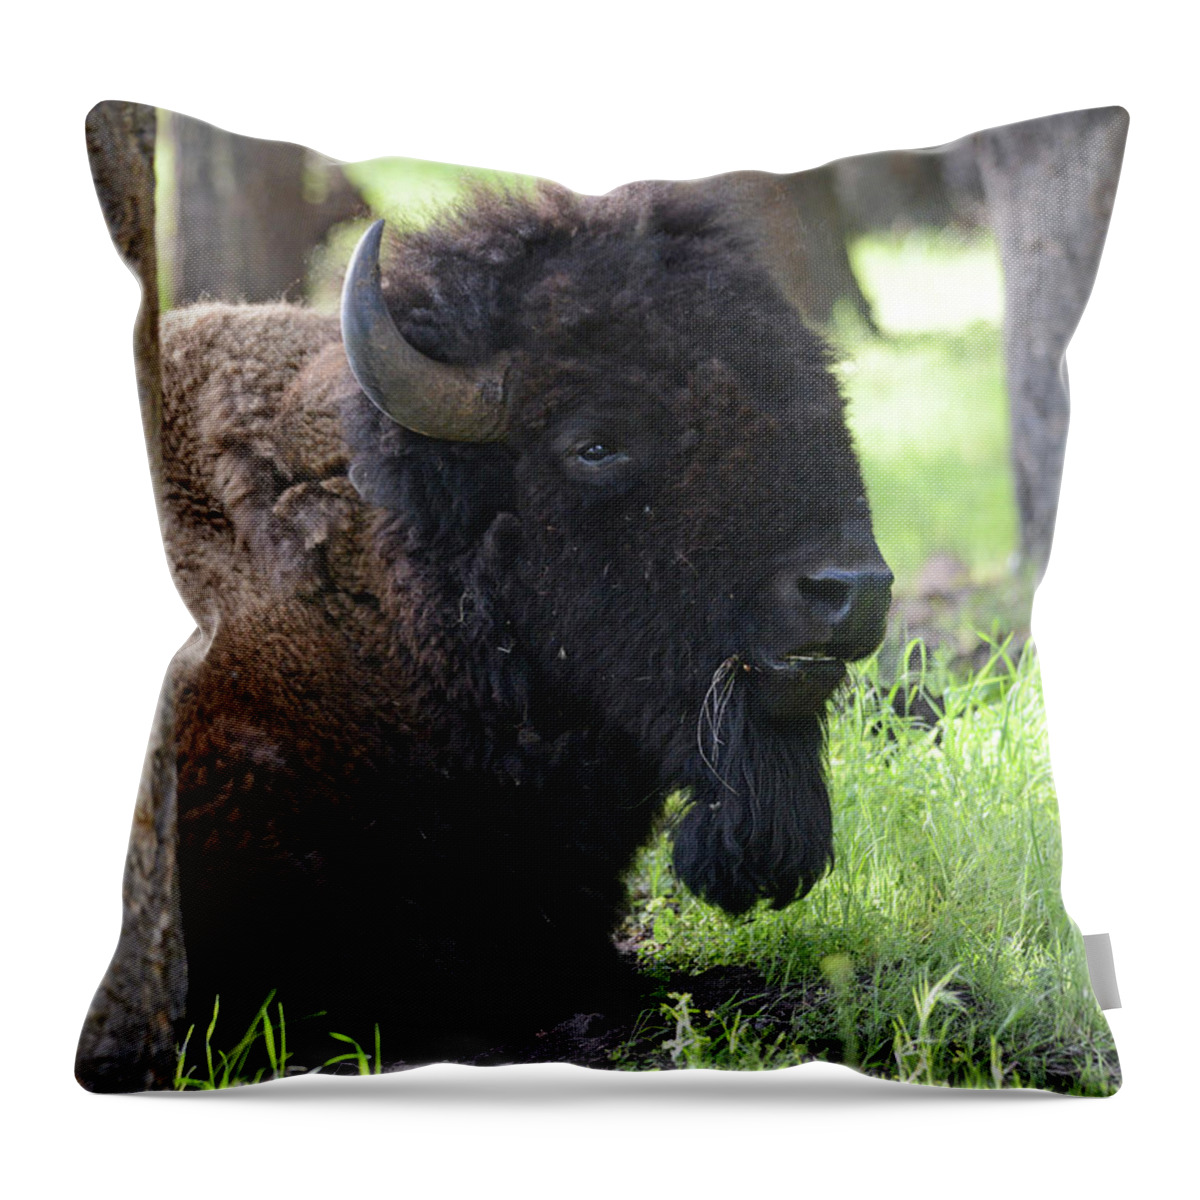 Bison Throw Pillow featuring the photograph Majestic Bison by Whispering Peaks Photography